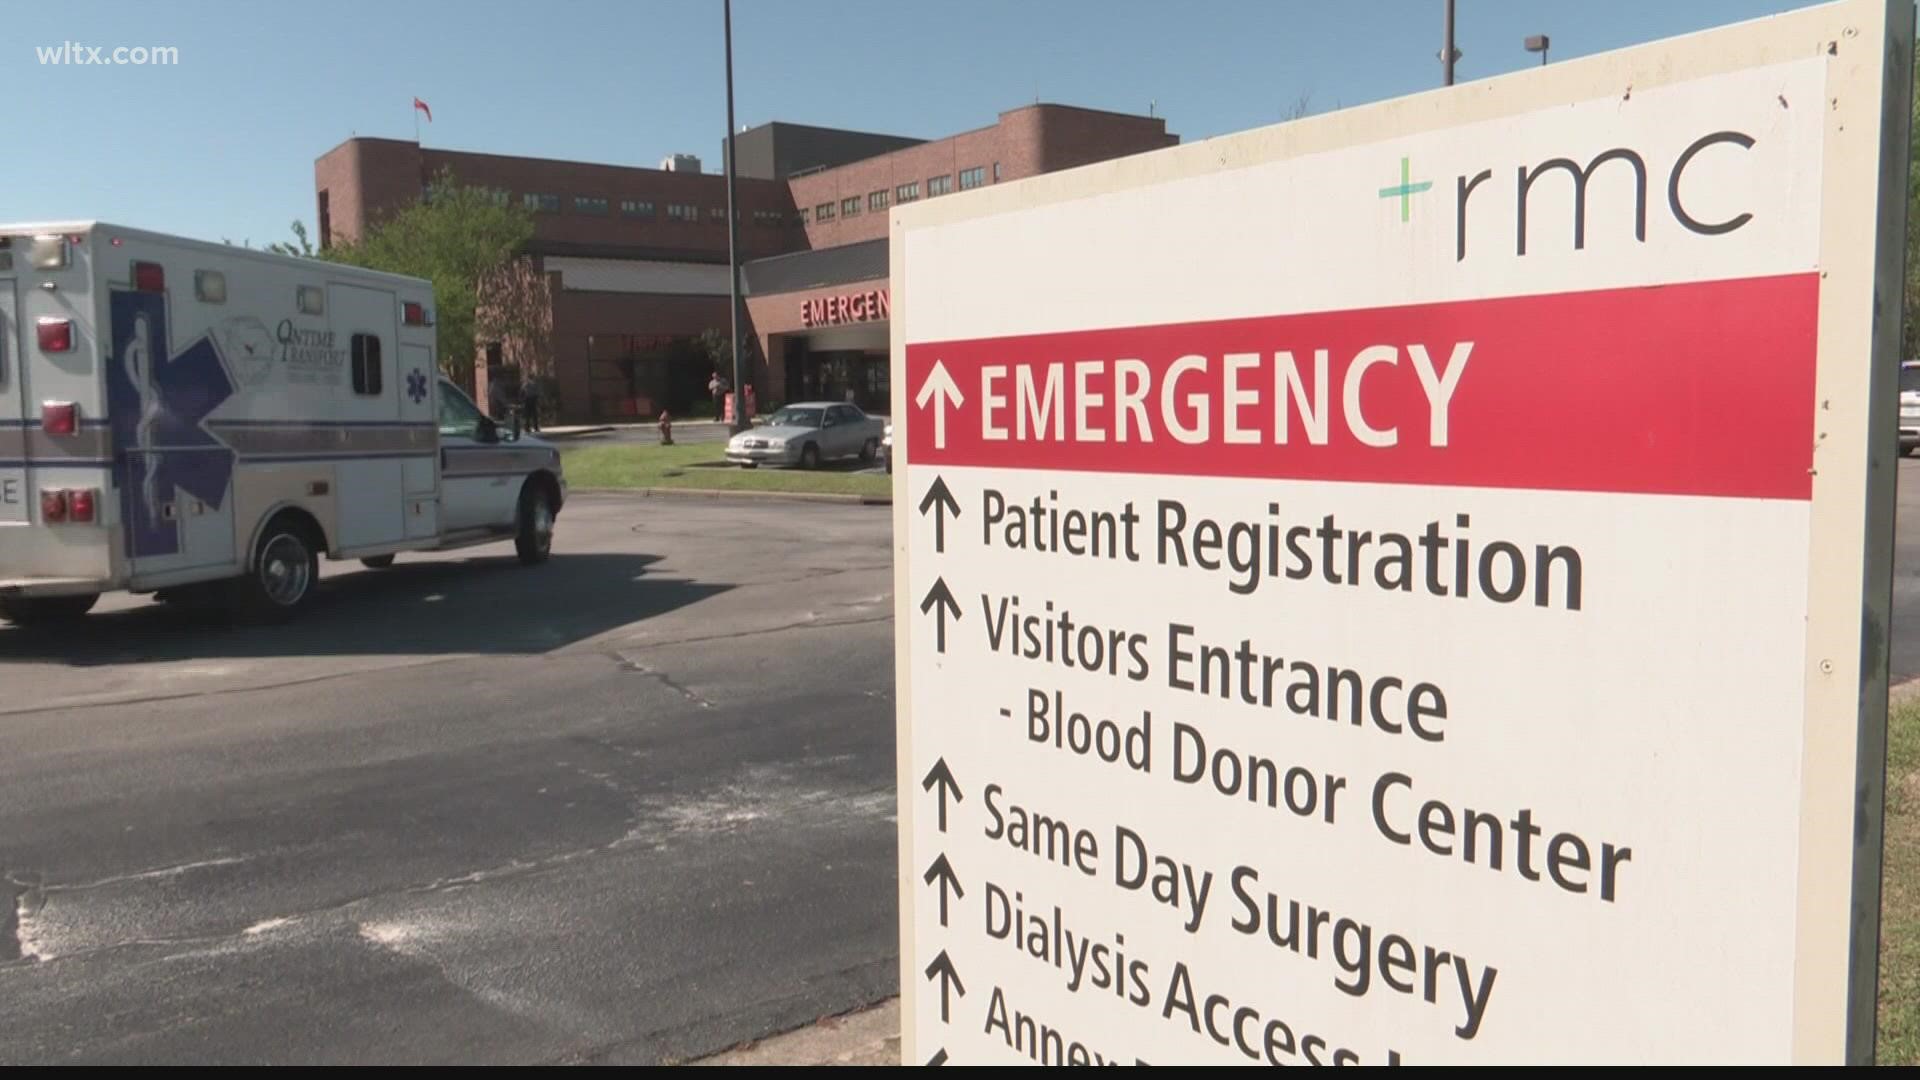 The Orangeburg hospital will use the funds for healthcare related expenses due to coronavirus.